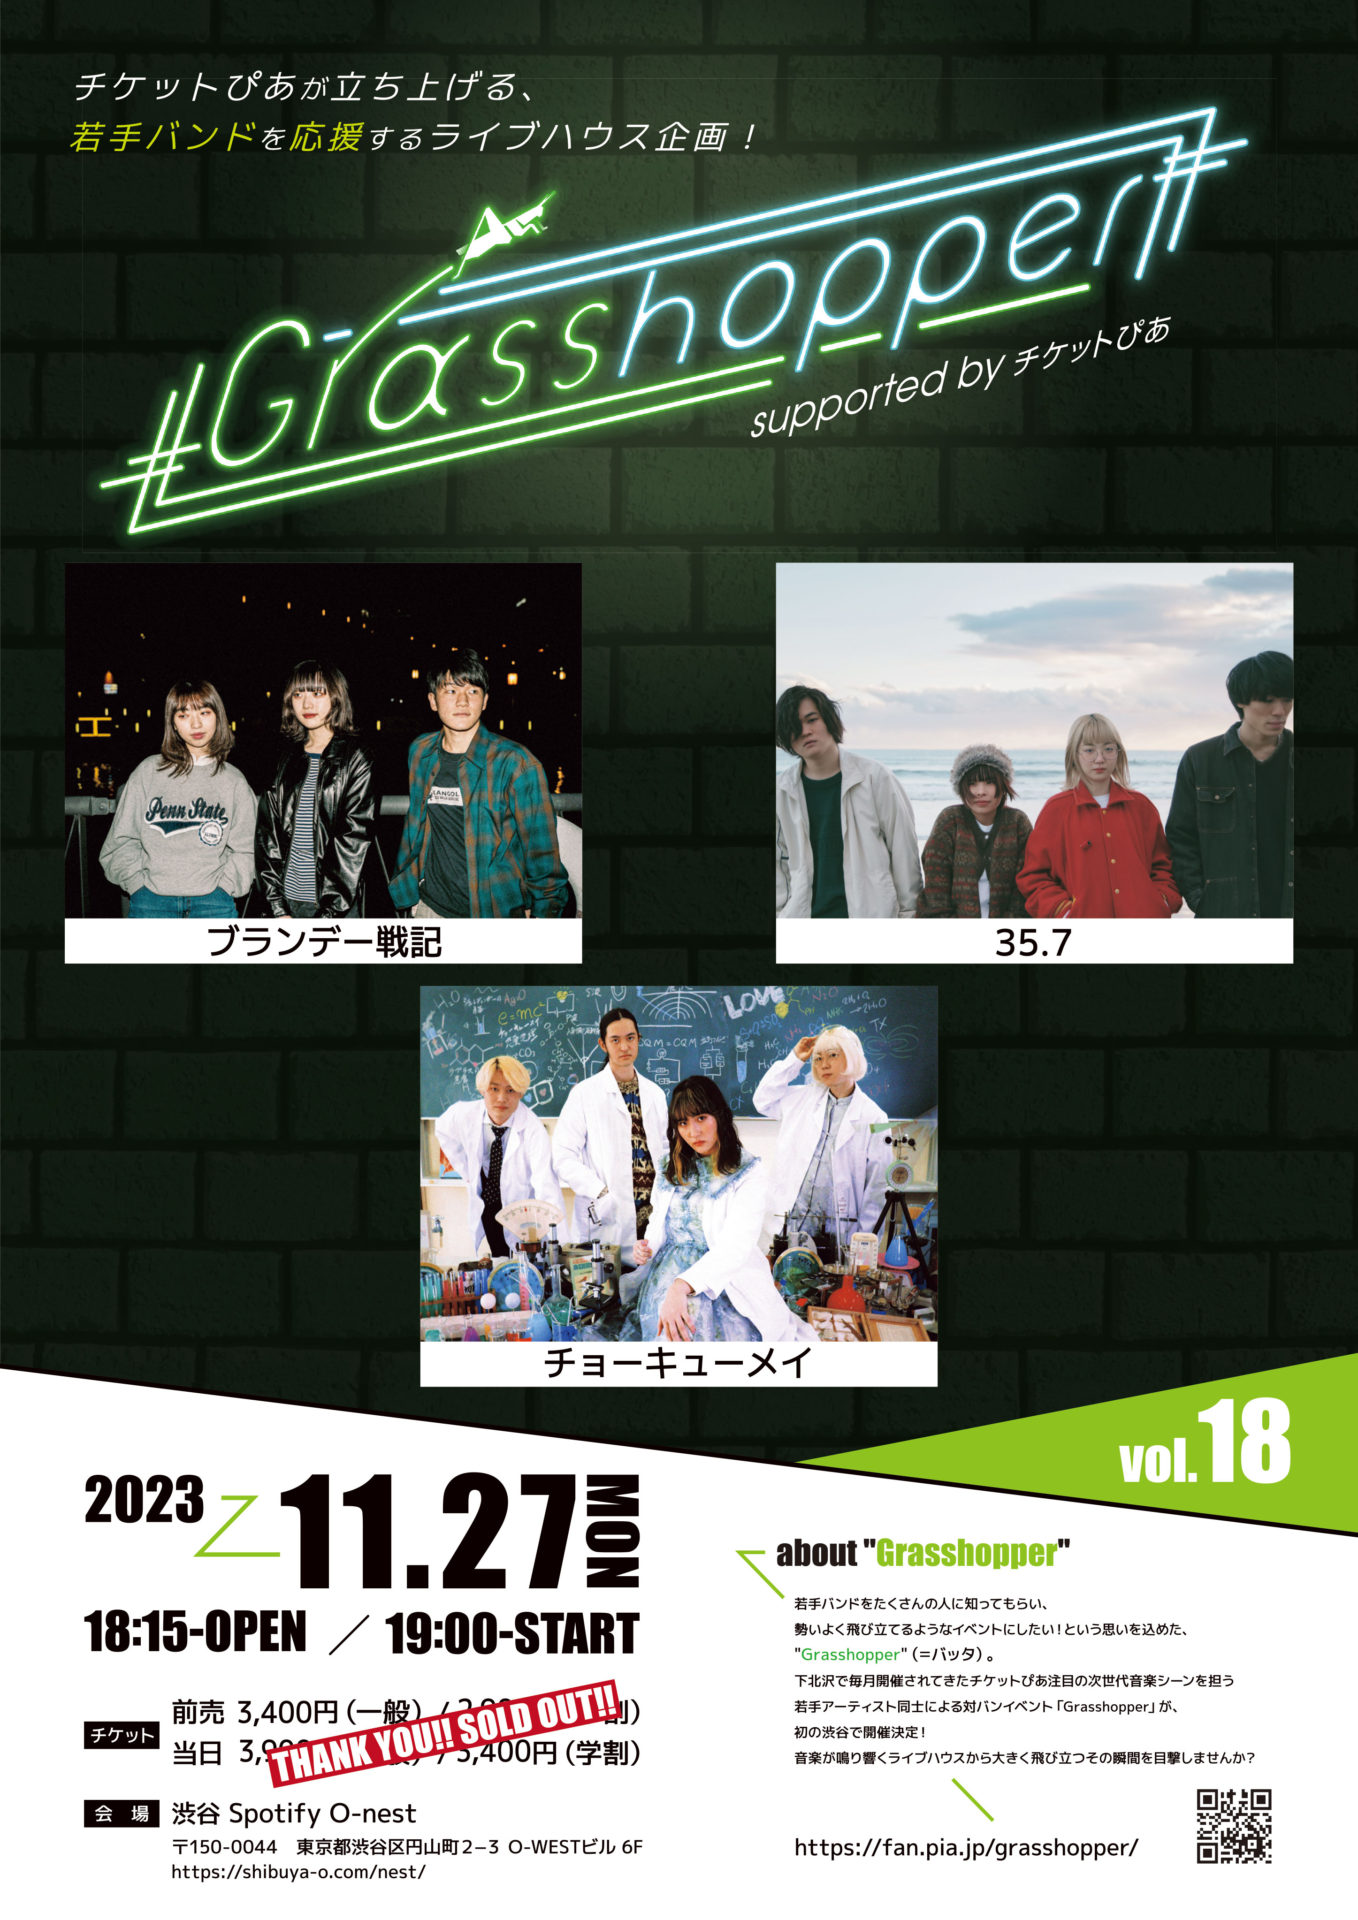 Grasshopper vol.18 suppoted by チケットぴあ